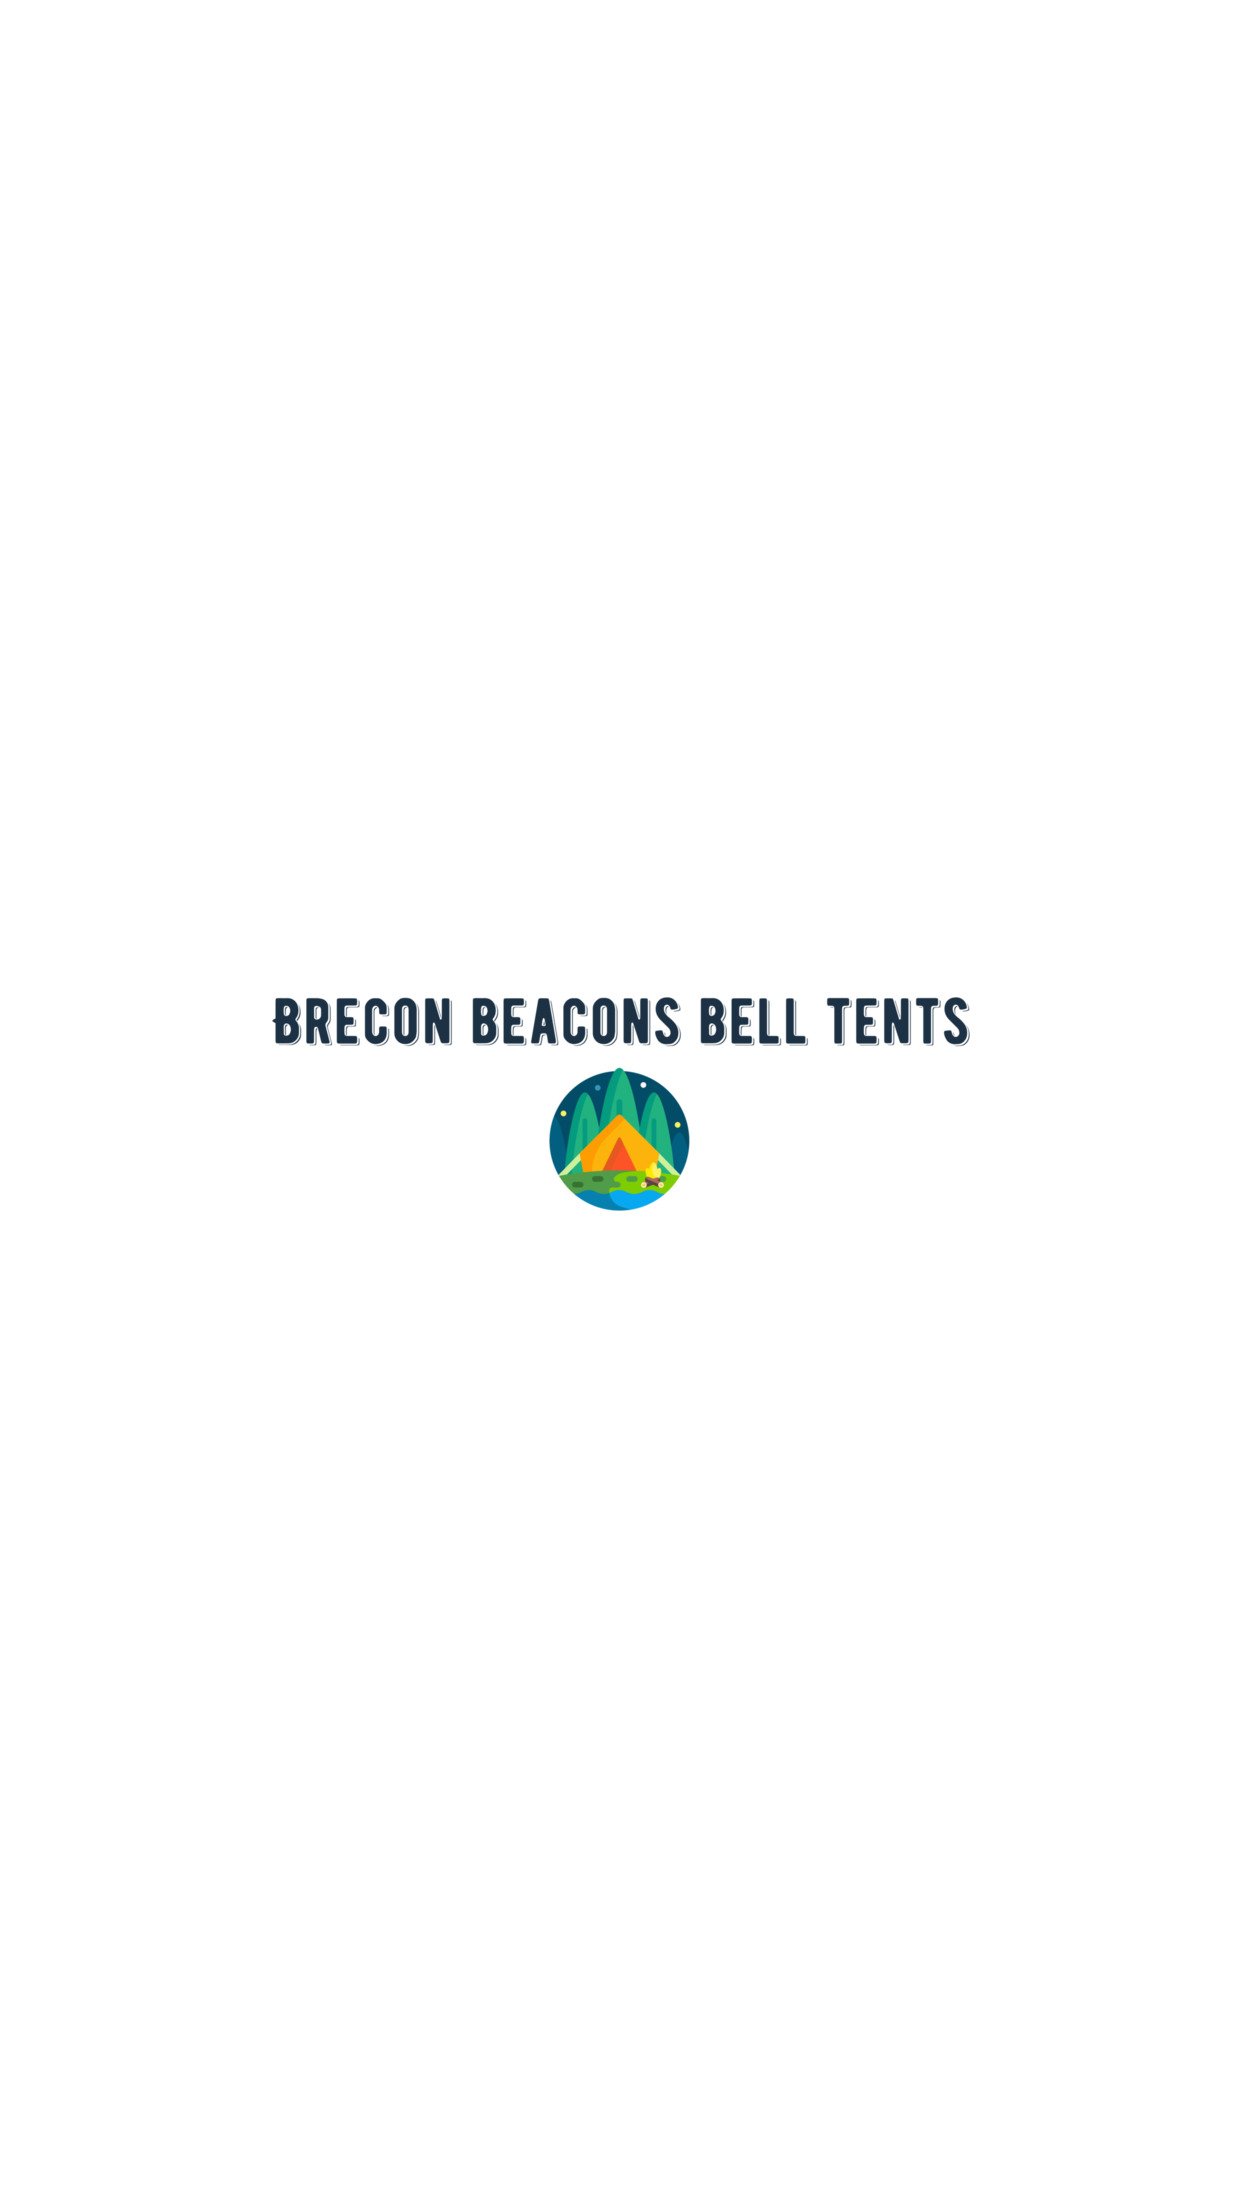 Brecon Beacons Bell Tents